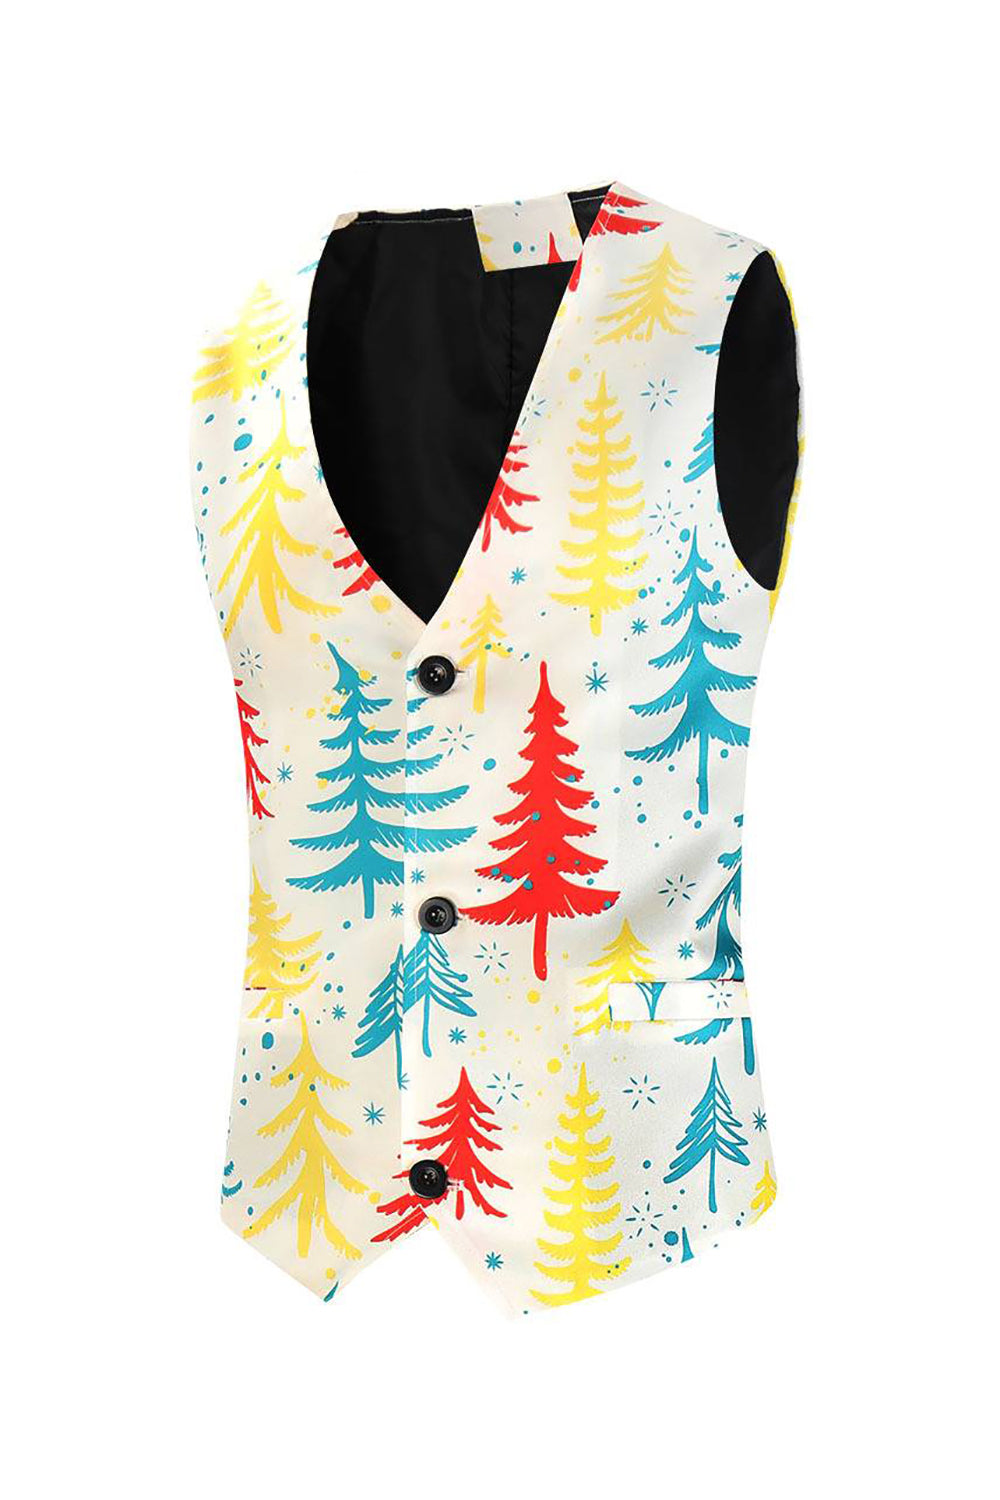 Single Breasted Ivory Menns Christmas Suit Vest